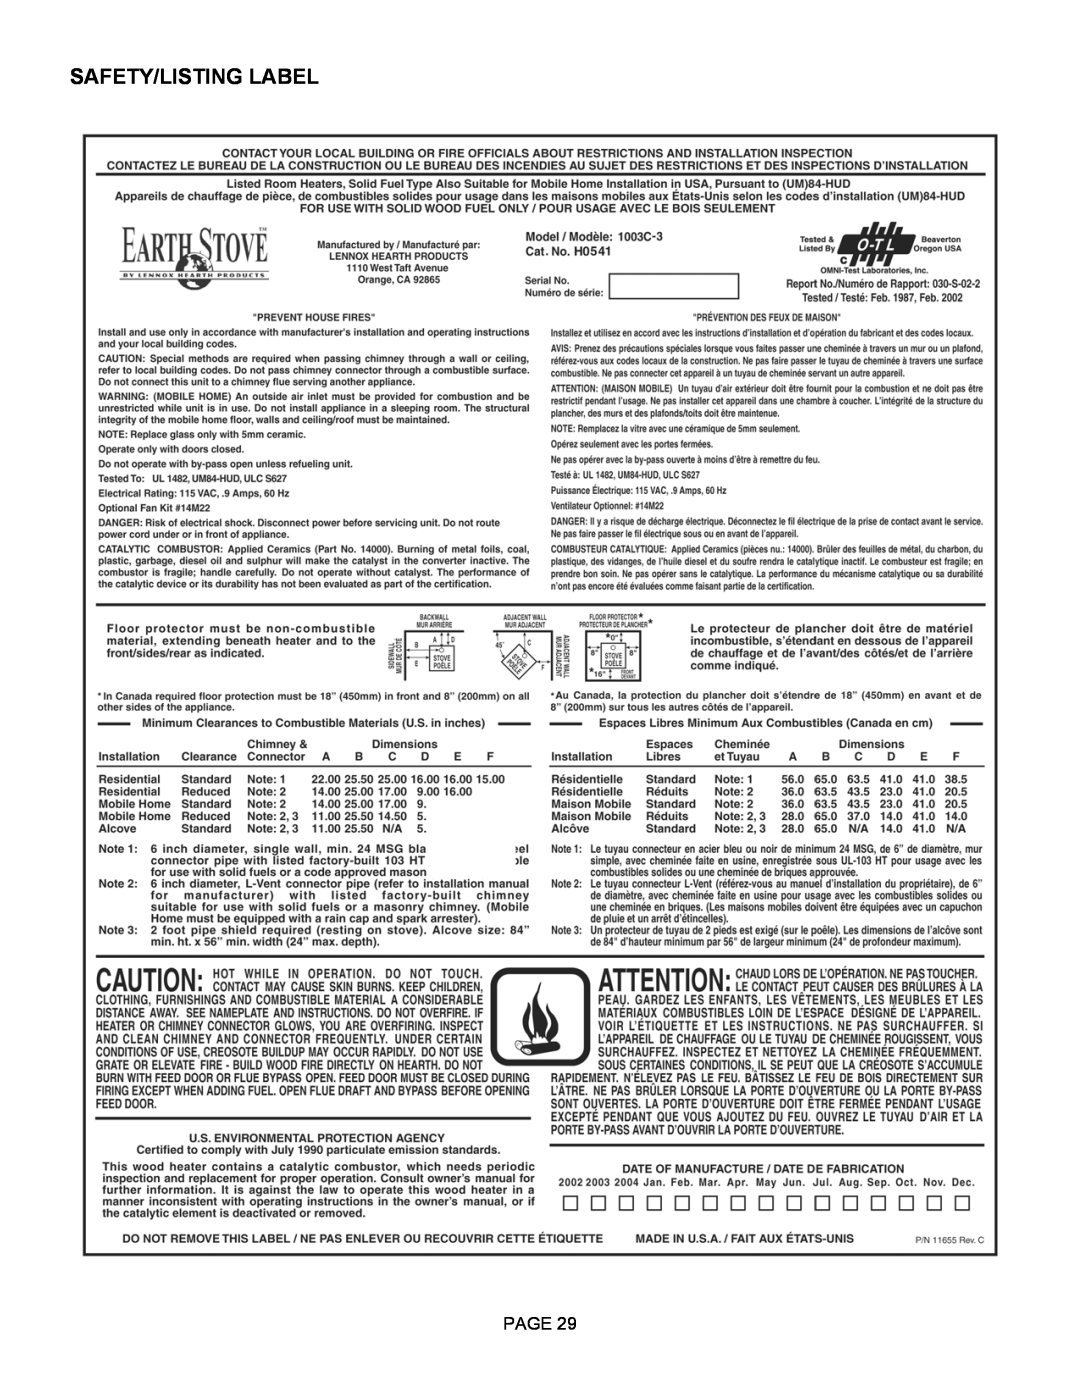 Lennox Hearth 1003C operation manual Safety/Listing Label, Page 